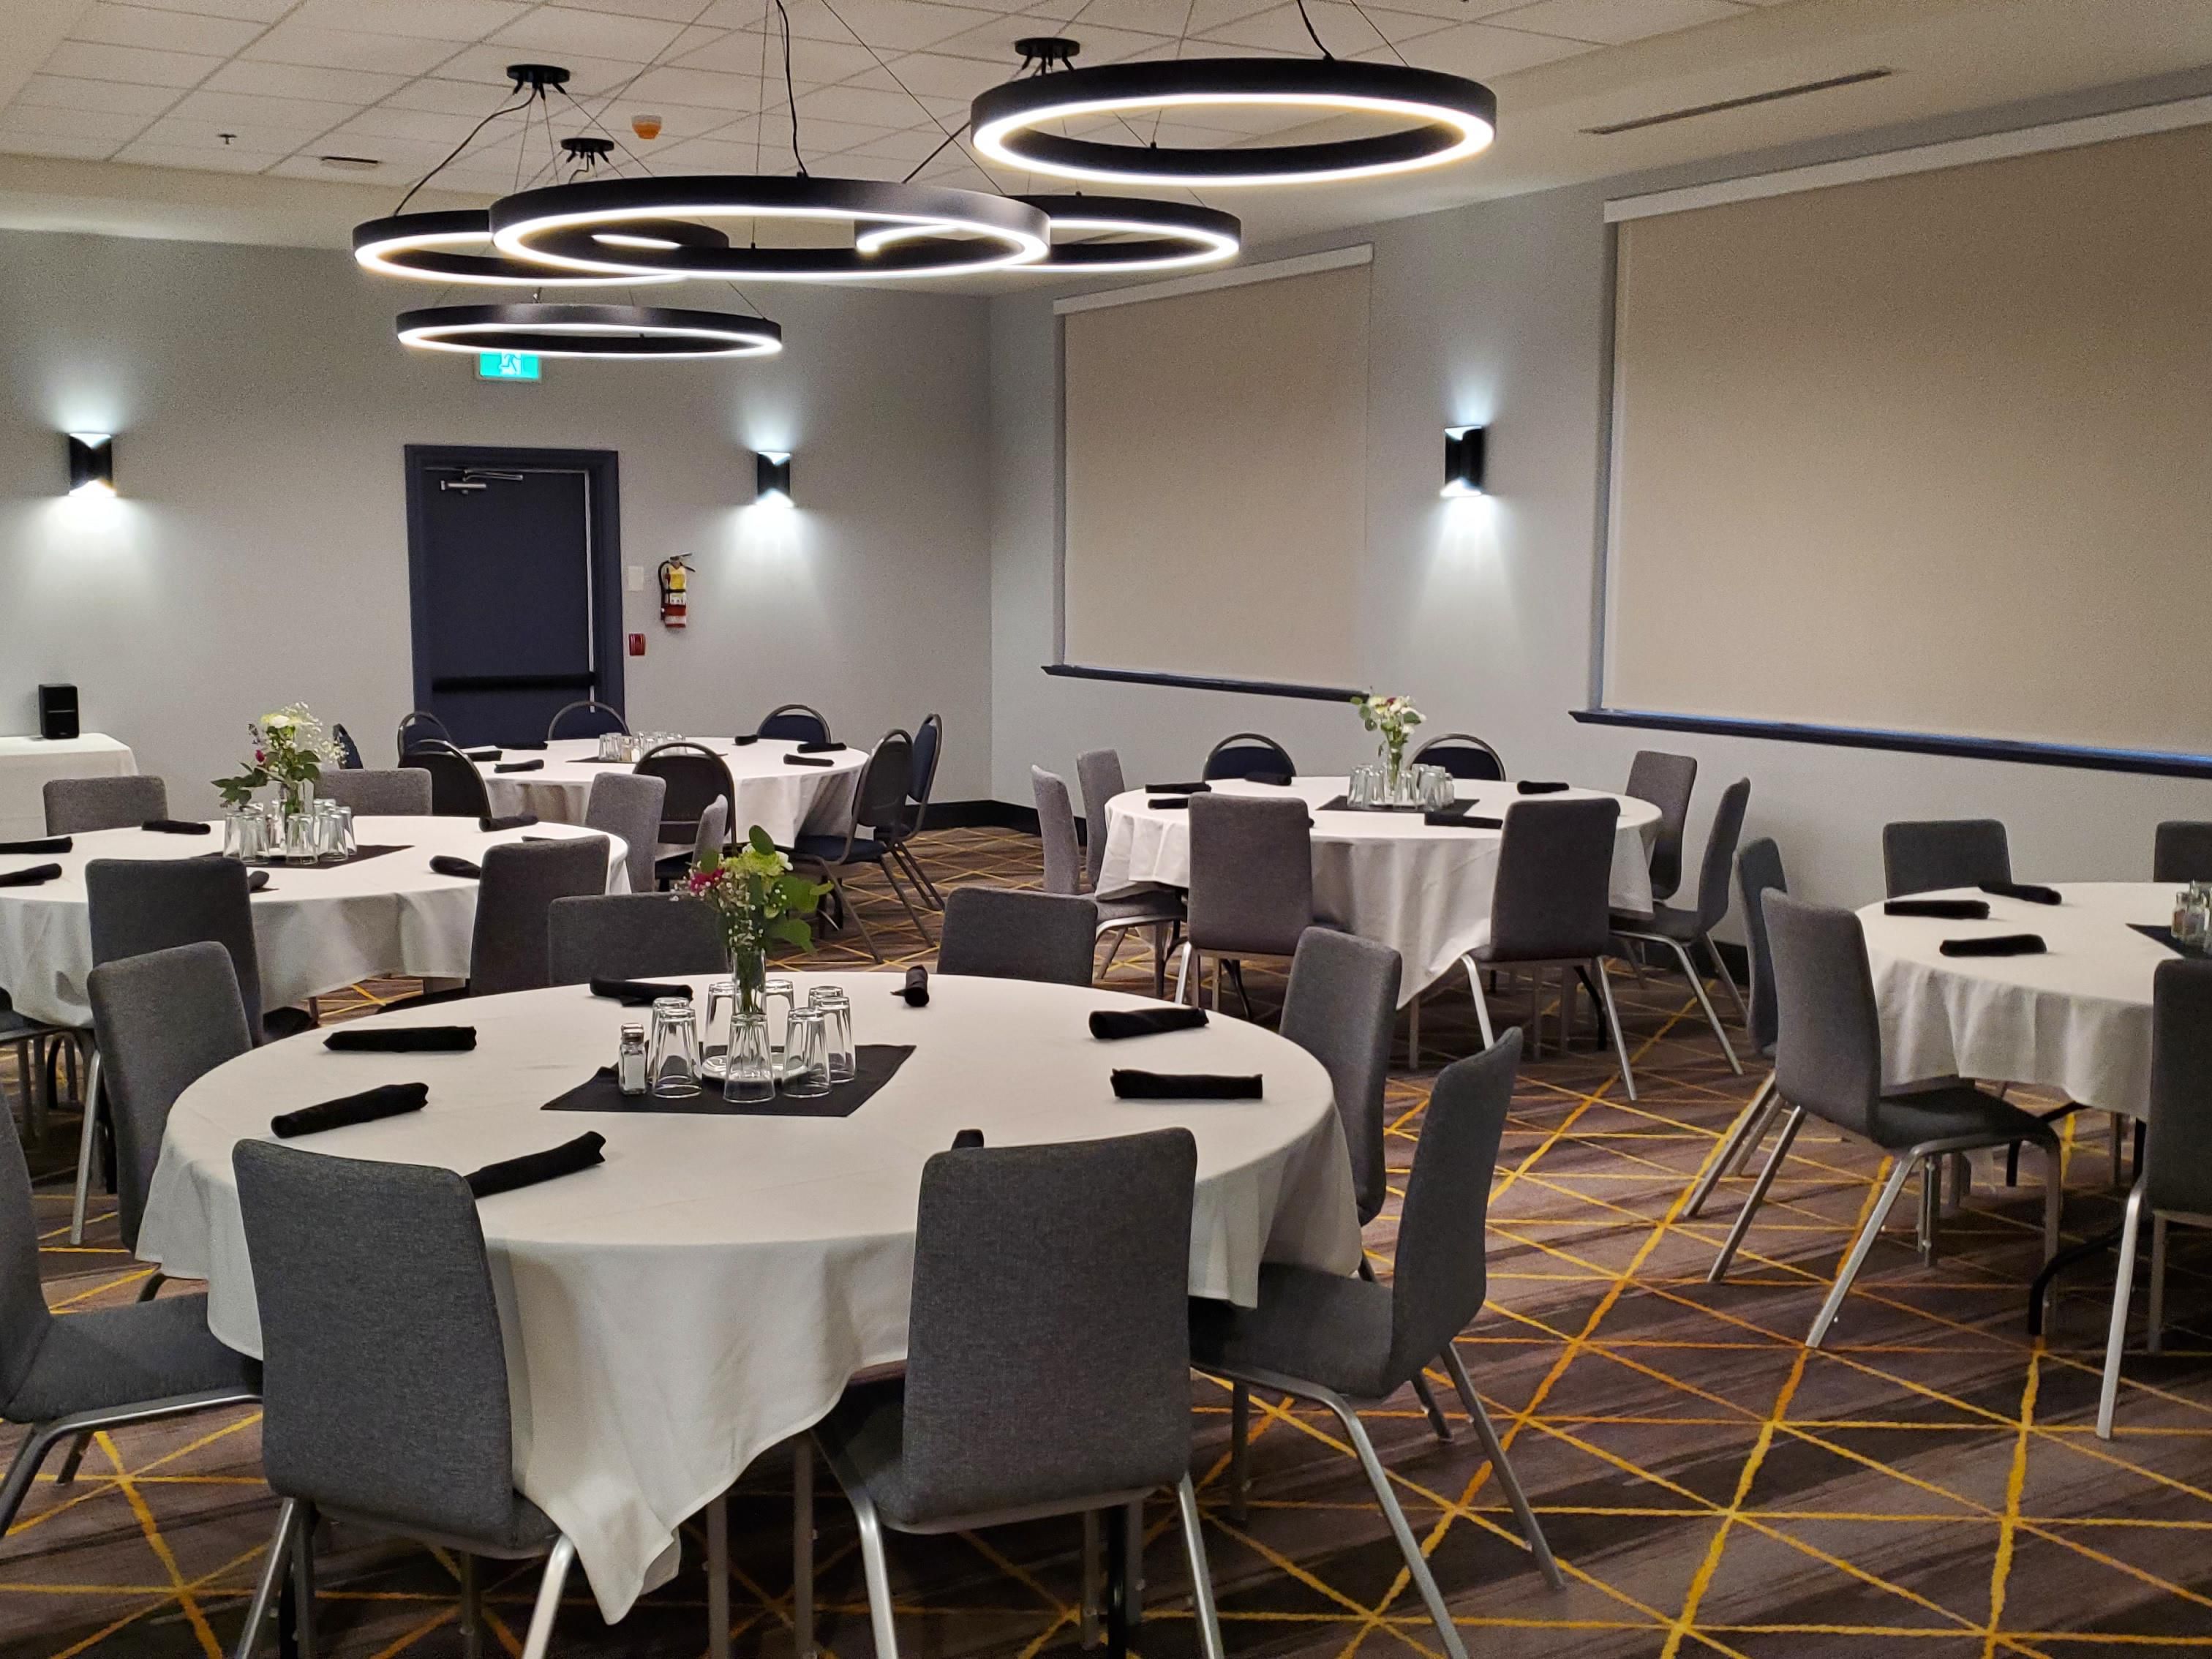 Plan your next meeting or special event with us. With 875 square feet of event space, our hotel features a banquet room that accommodates up to 60 guests. We also arrange great rates for groups—large or small.